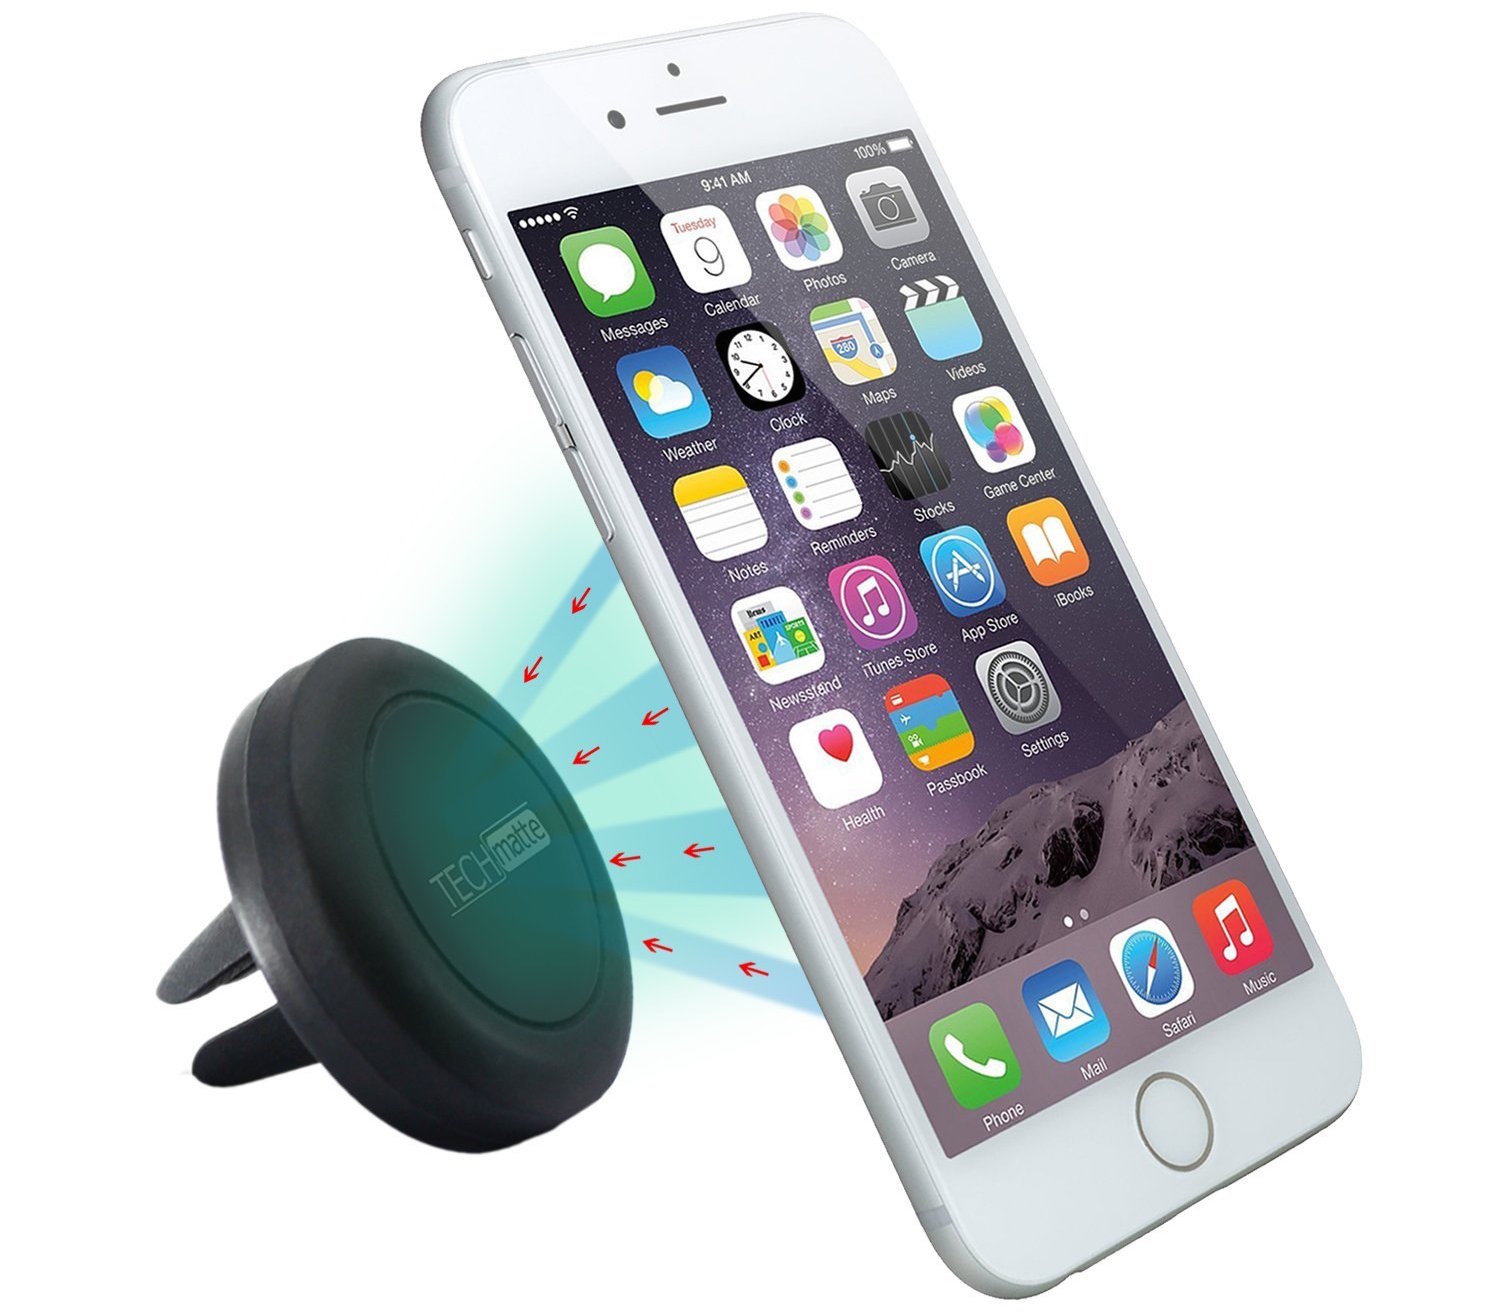 on a holiday serve Laziness TechMatte Magnetic Air Vent Car Mount Holder for iPhone 6/Plus & other  smartphones $6 Prime shipped (Orig. $11)